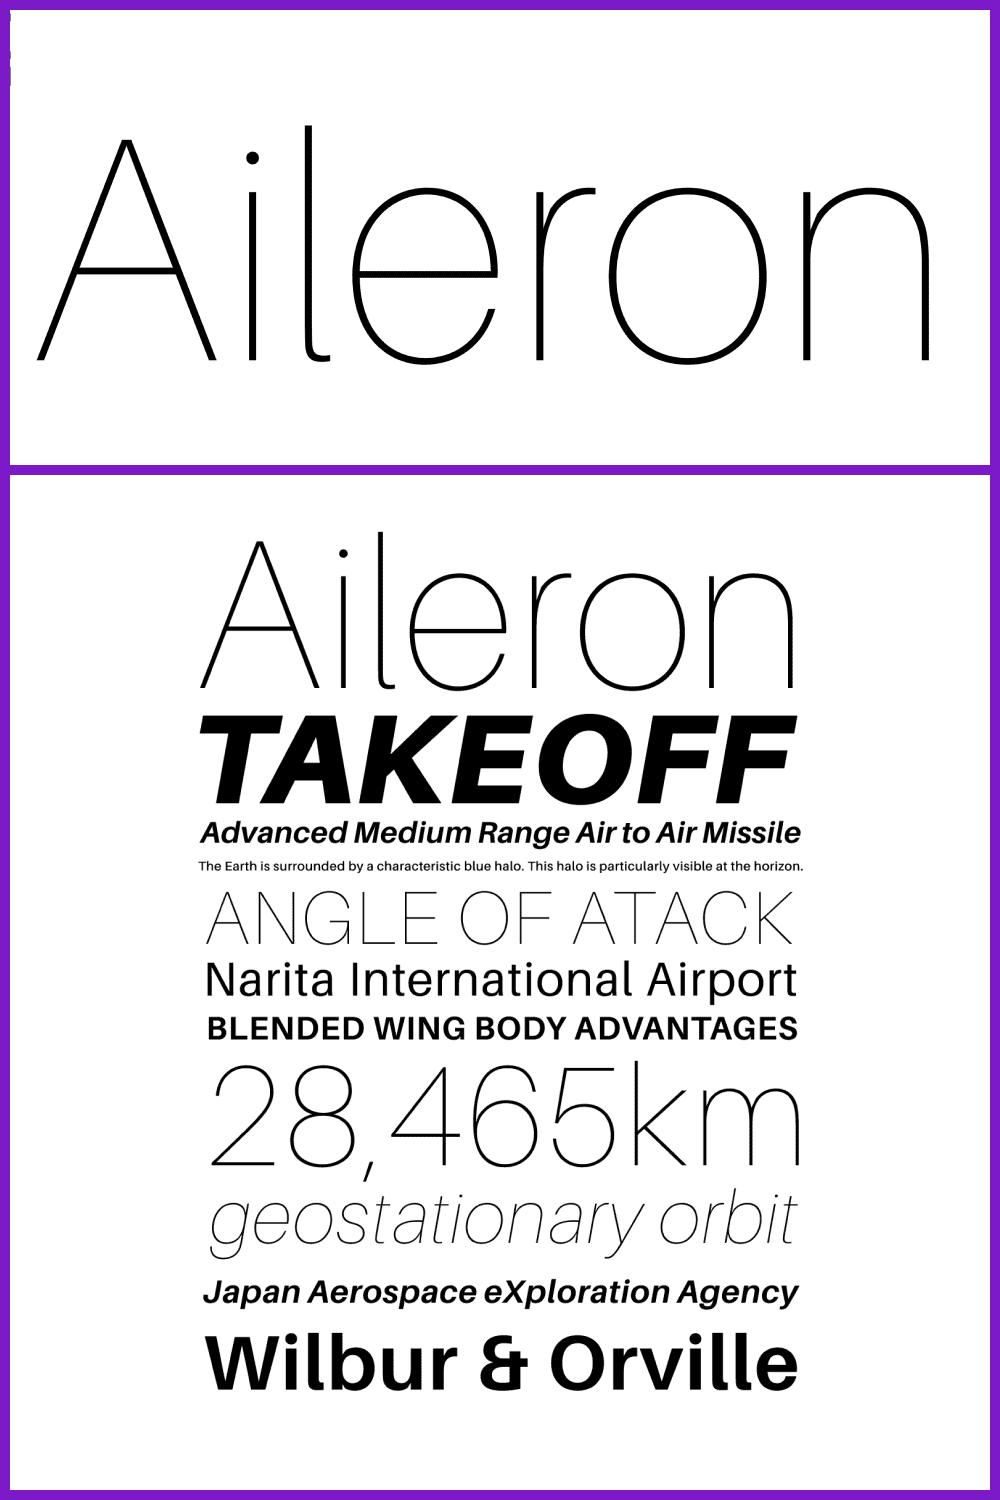 Aileron is available in 10 different styles.